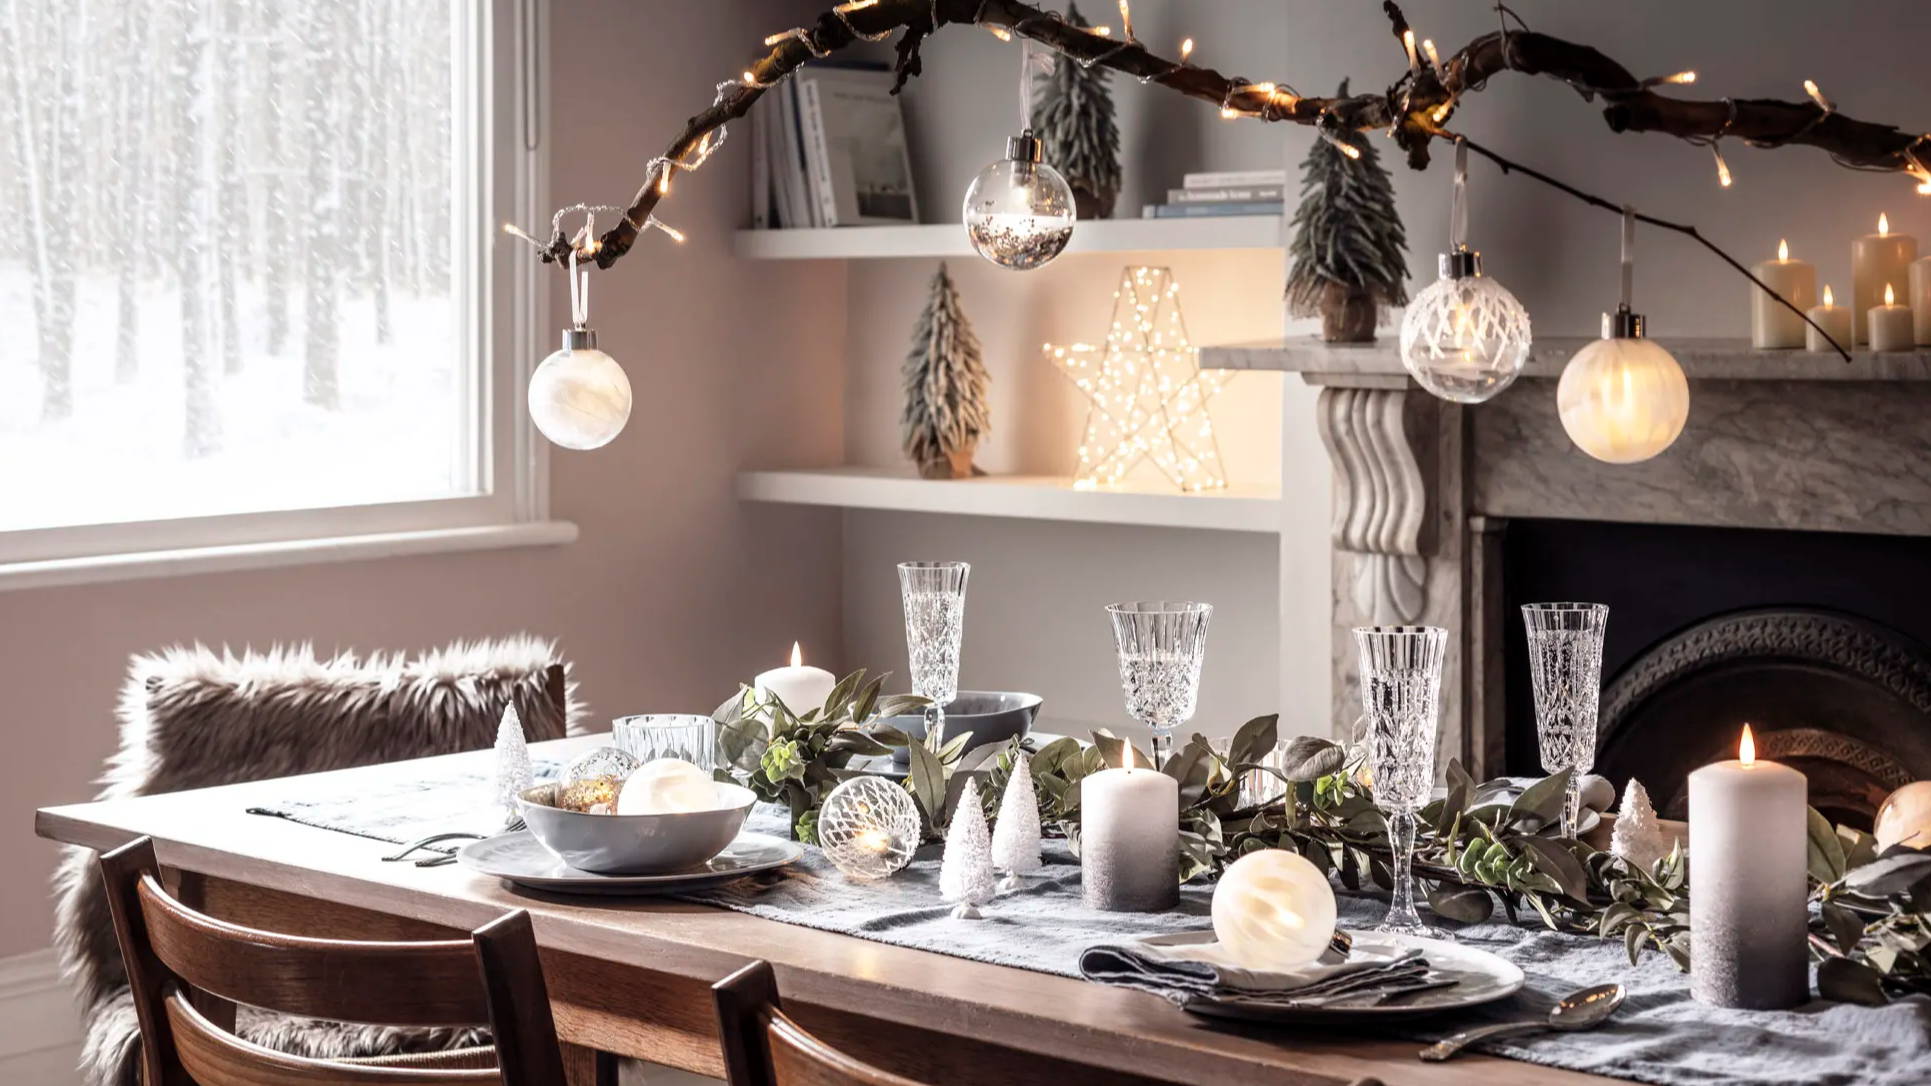 Festive dining table with baubles, candles and mini Christmas trees.